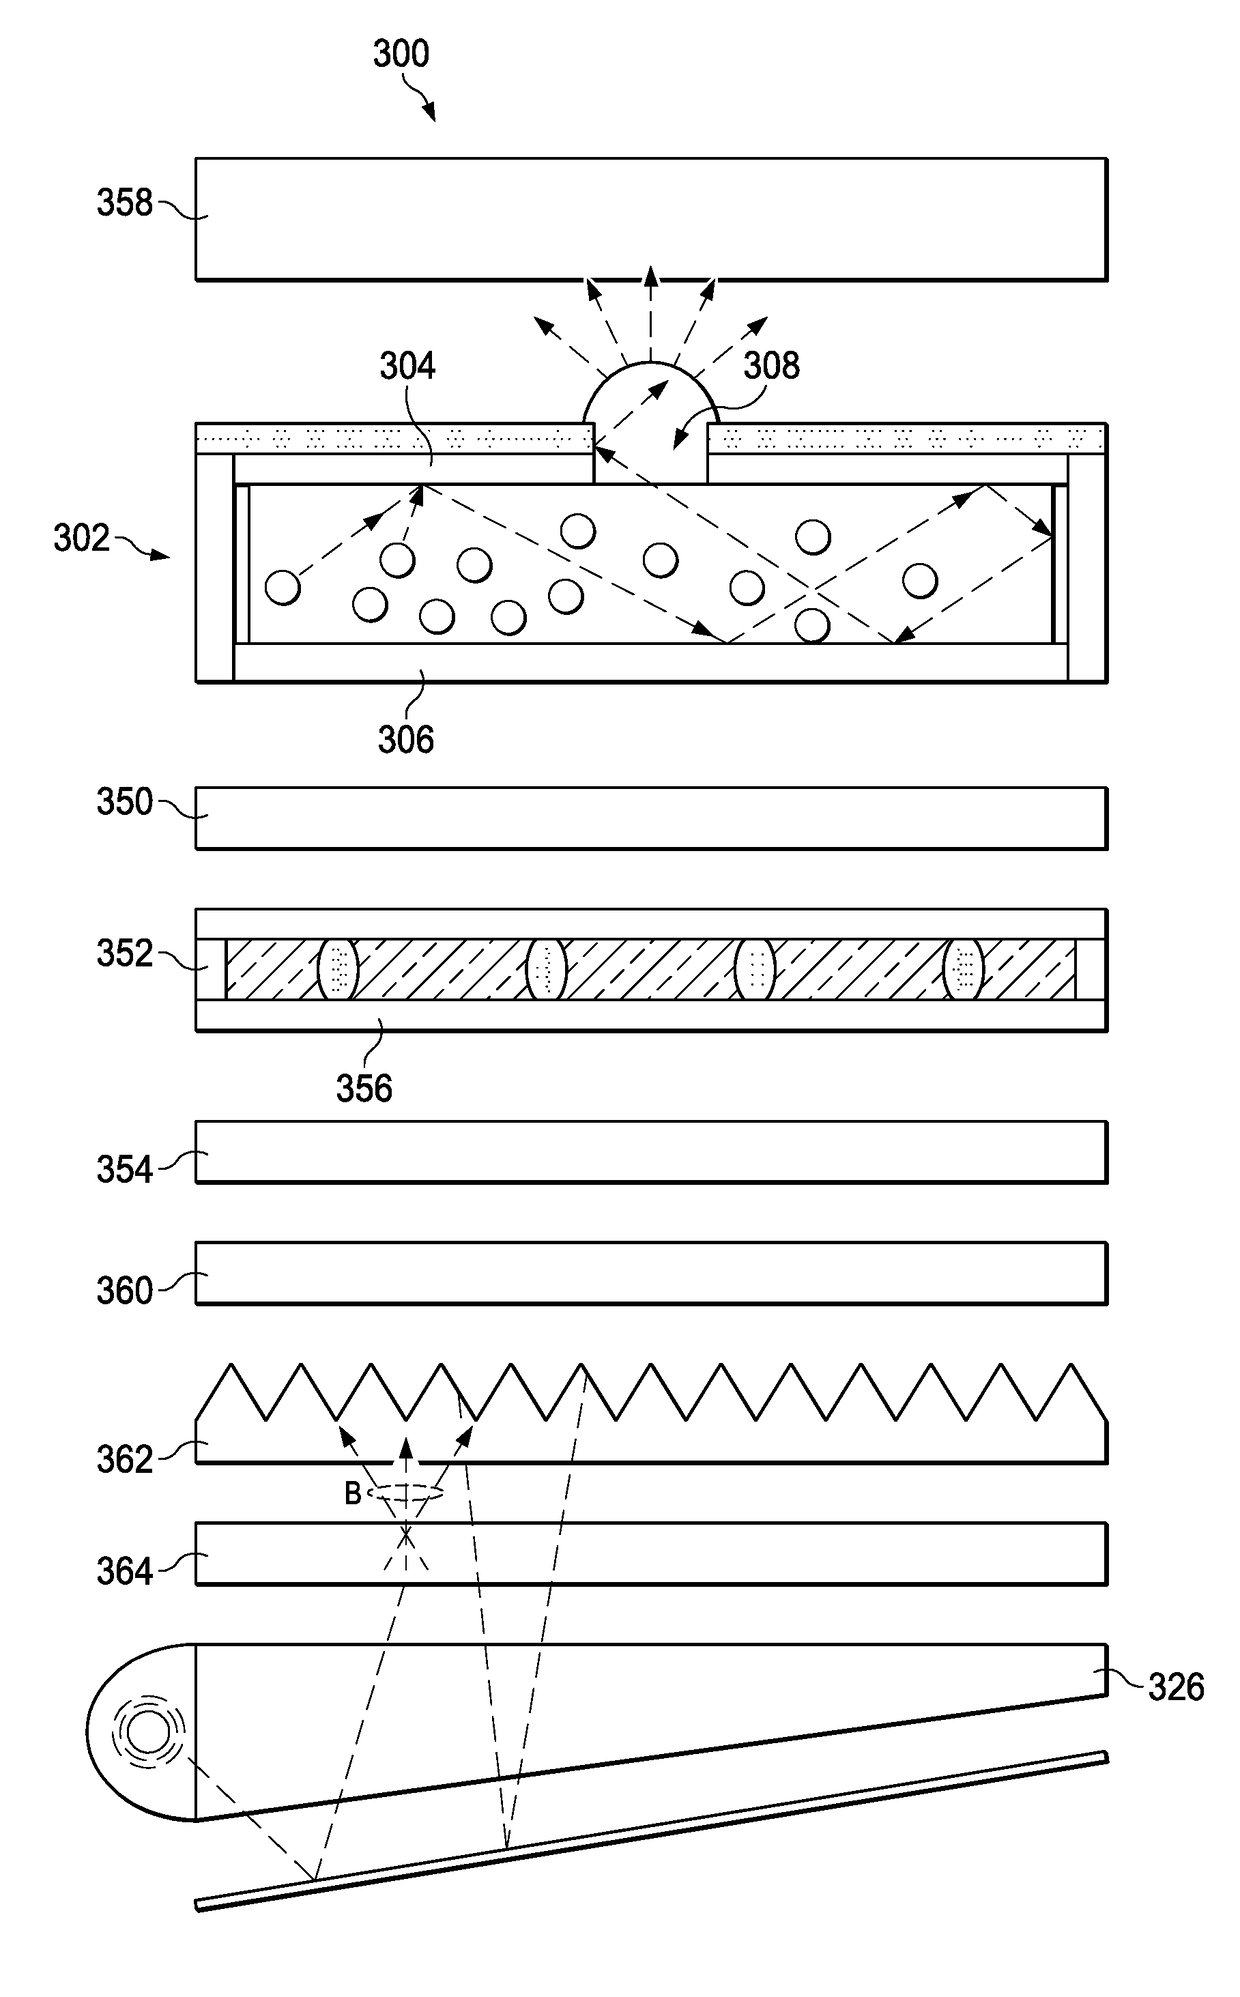 Optical microcavity for a high-contrast display